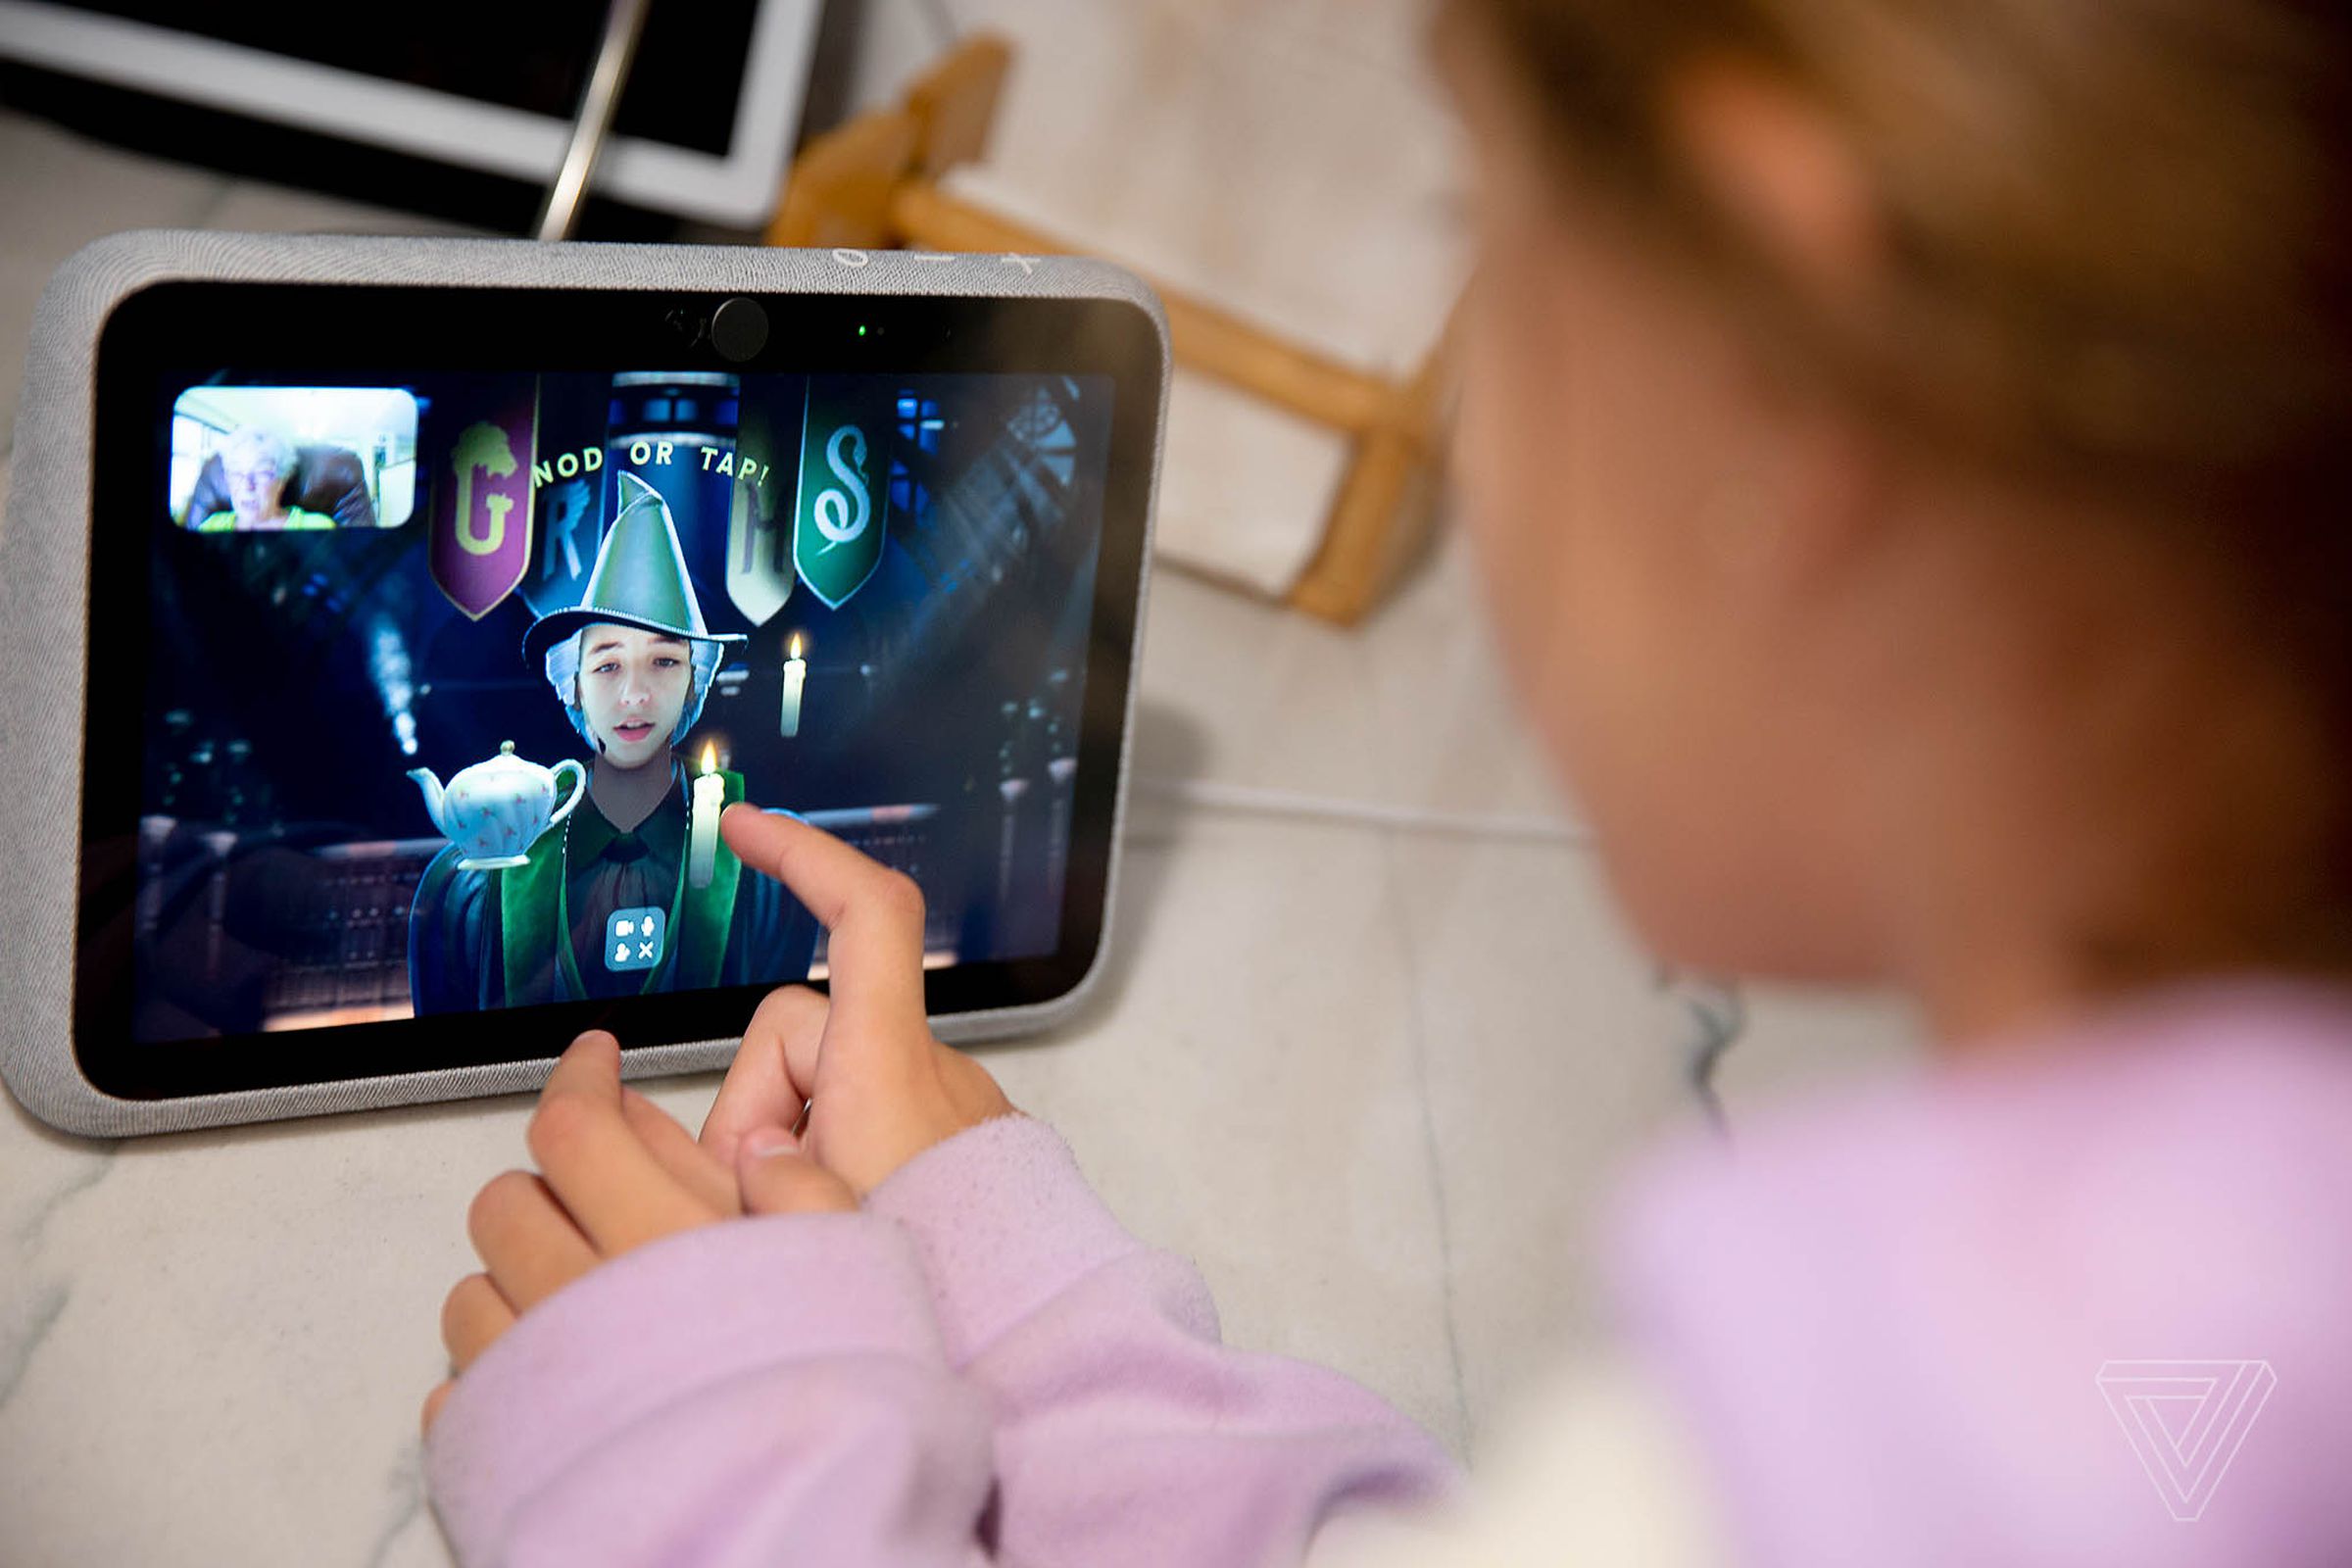 The interactive features on the Portal Go — including a new Harry Potter and the Cursed Child game — helped keep my children engaged on video calls. However, the interface was often confusing.